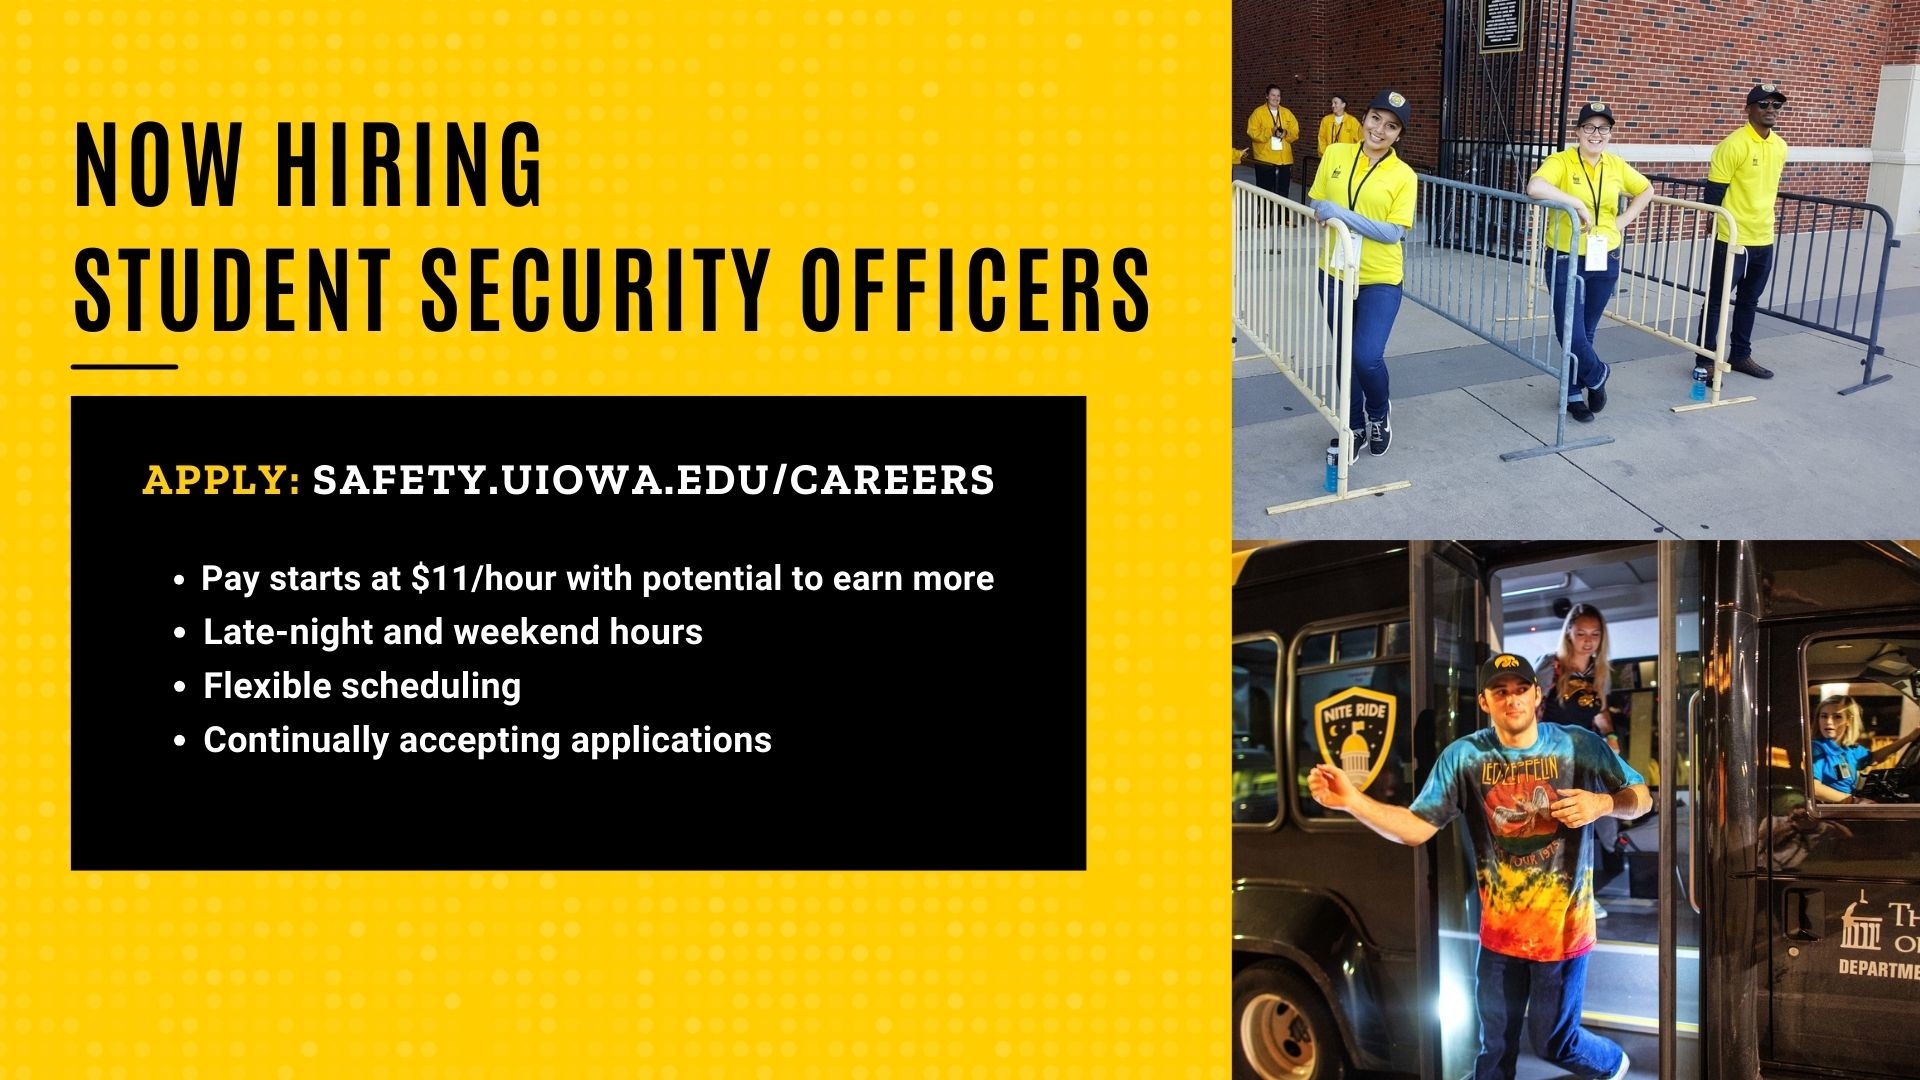 Now hiring student security officers apply at safety.uiowa.edu